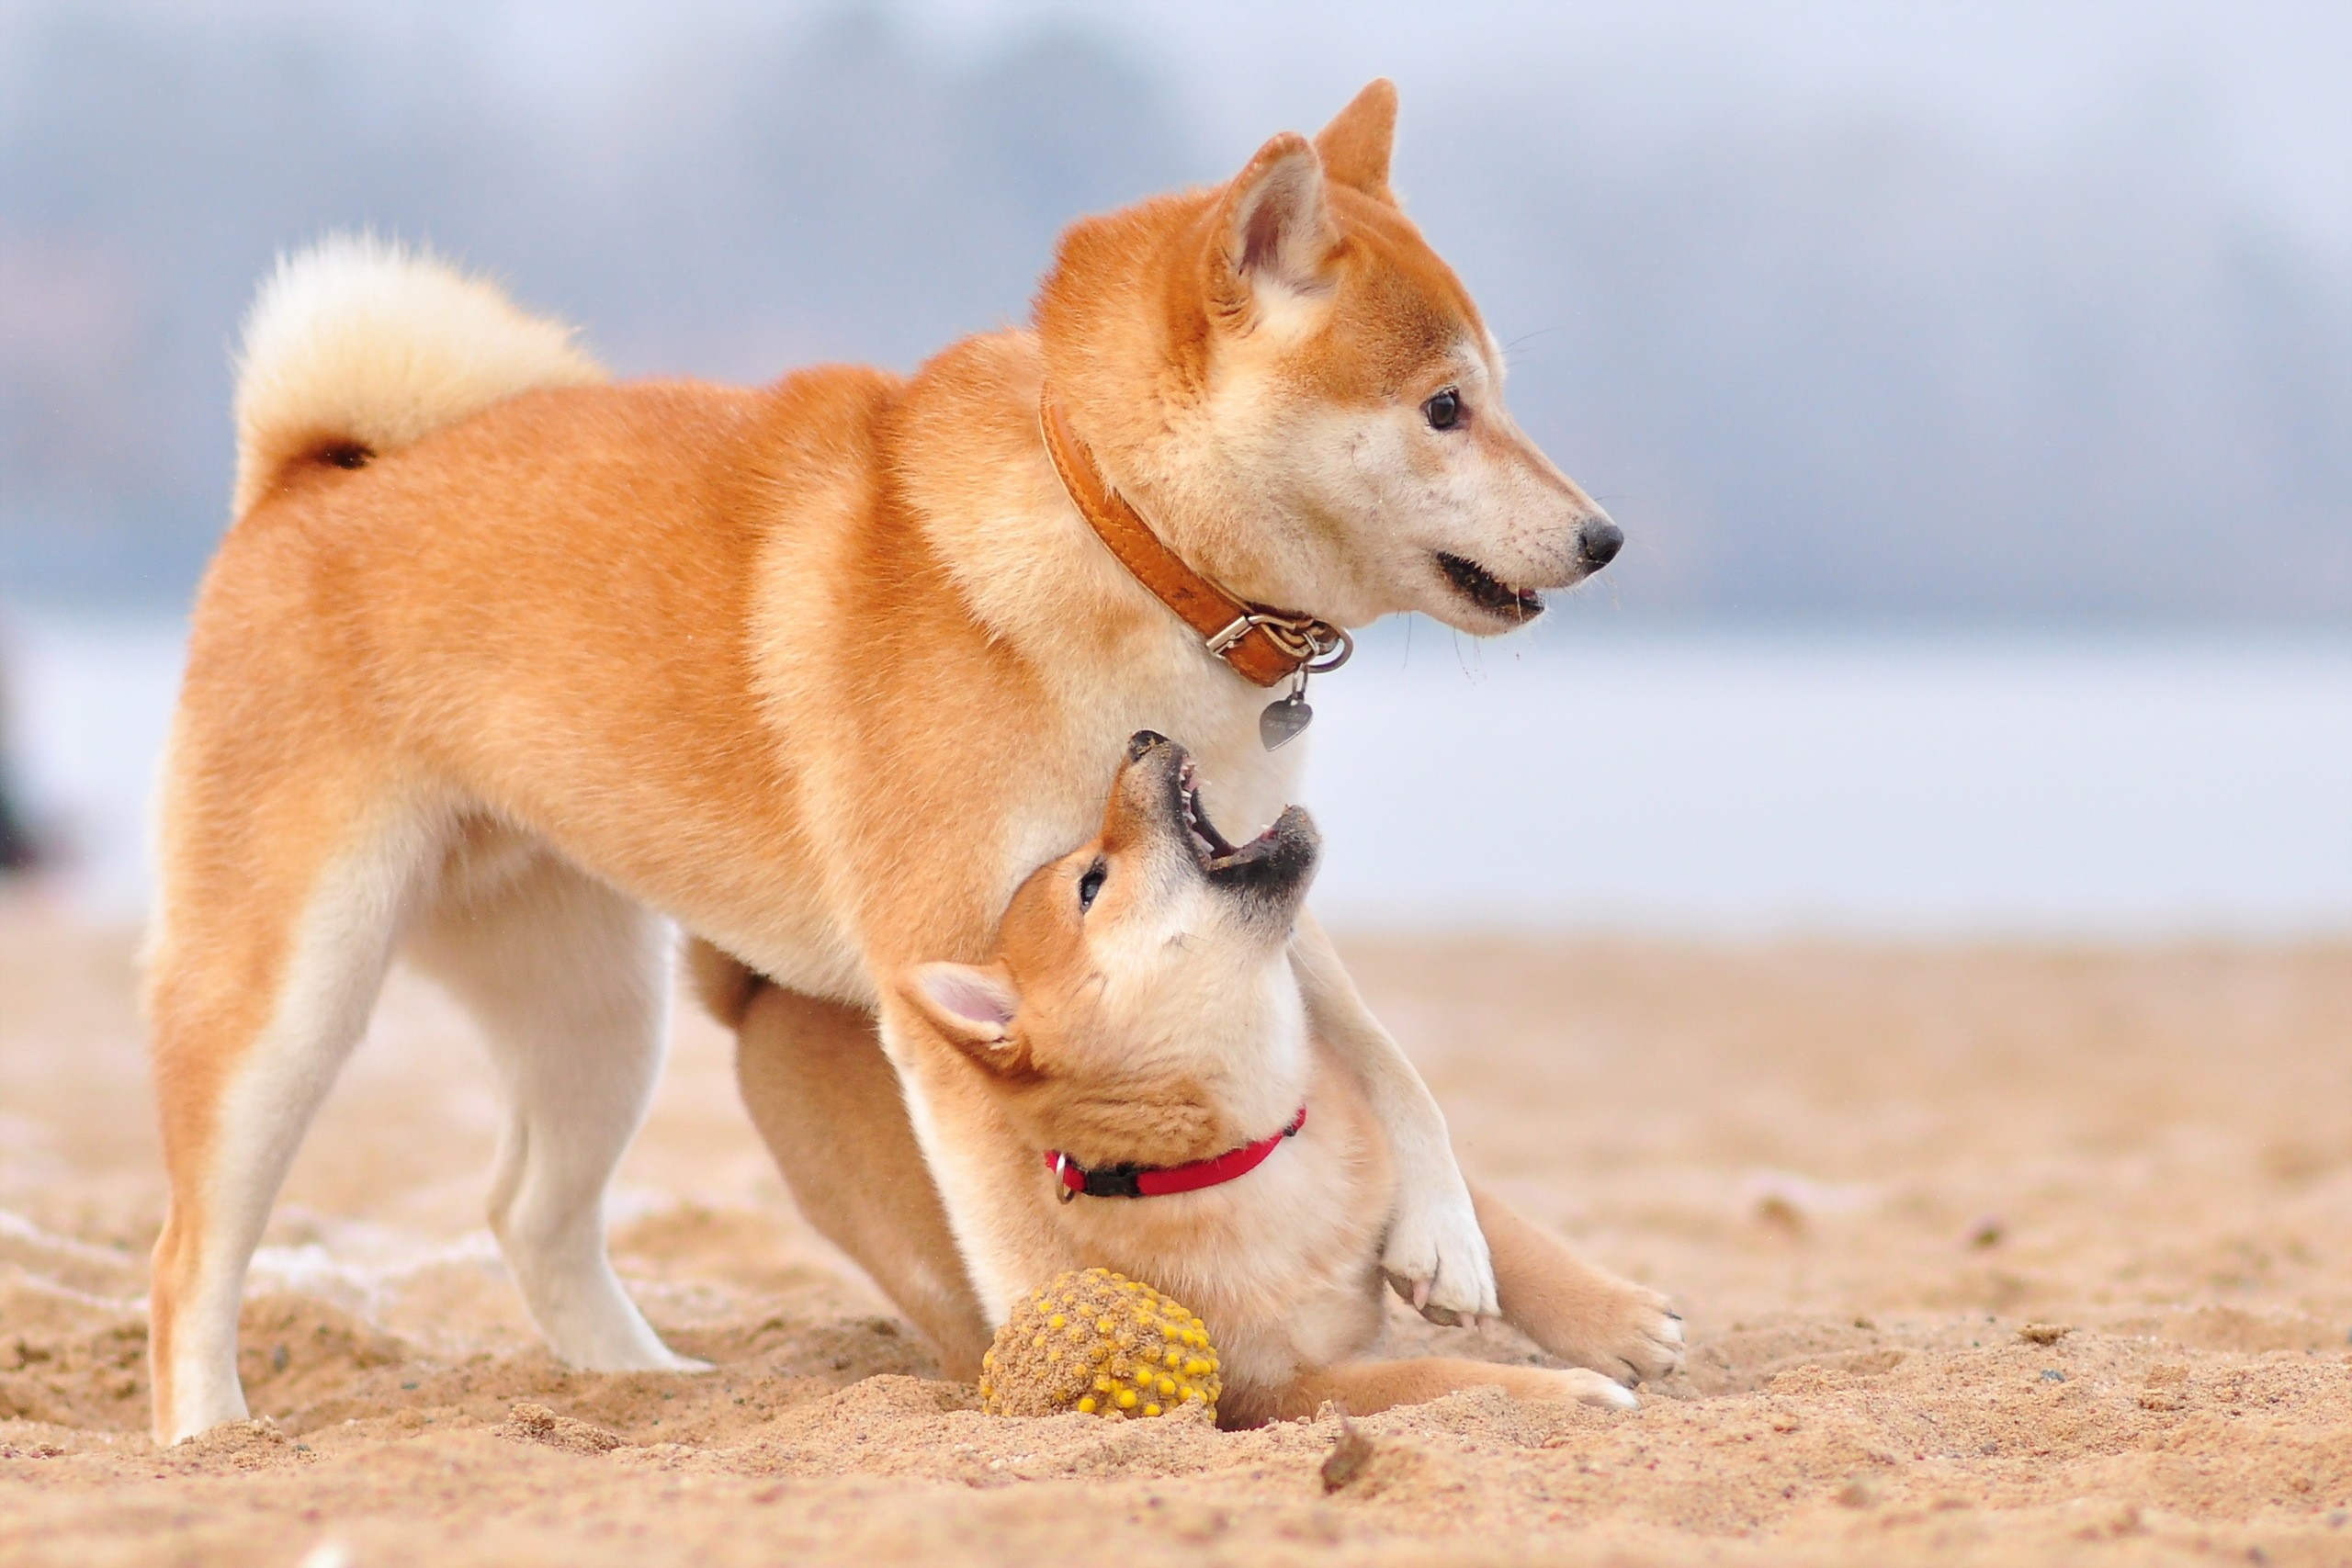 General 2560x1707 dog playing mammals animals outdoors sand